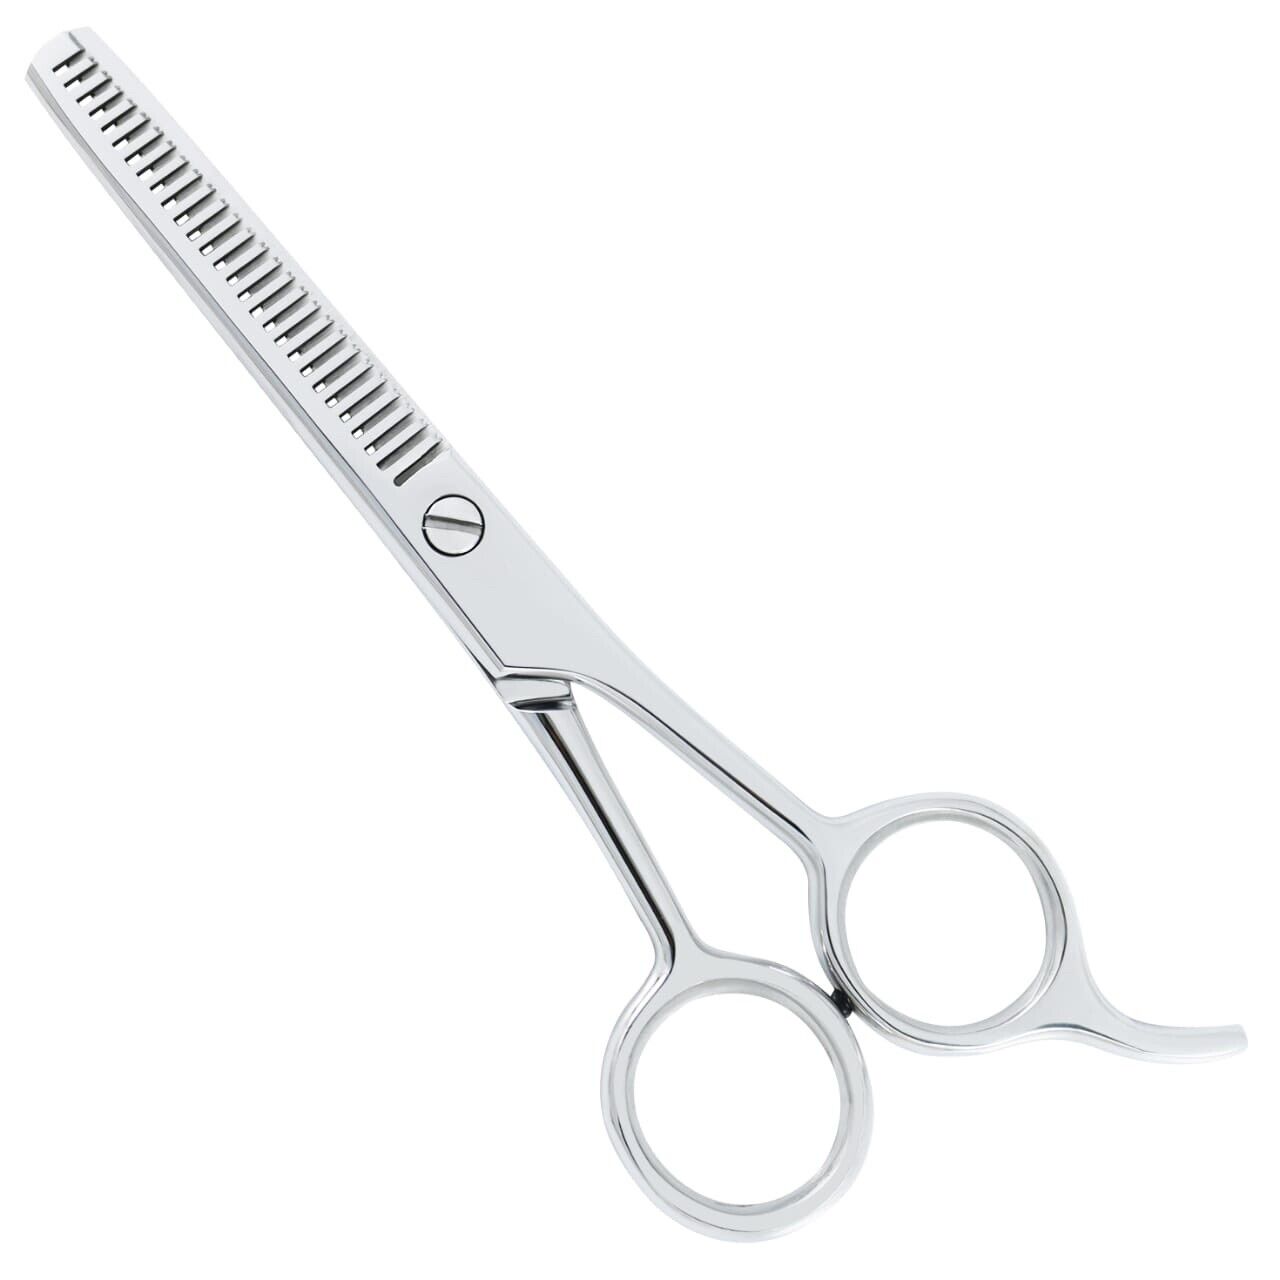 PROFESSIONAL SALON HAIR CUTTING&THINNING SCISSORS BARBER SHEARS HAIRDRESSING vertical int Does Not Apply - фотография #2